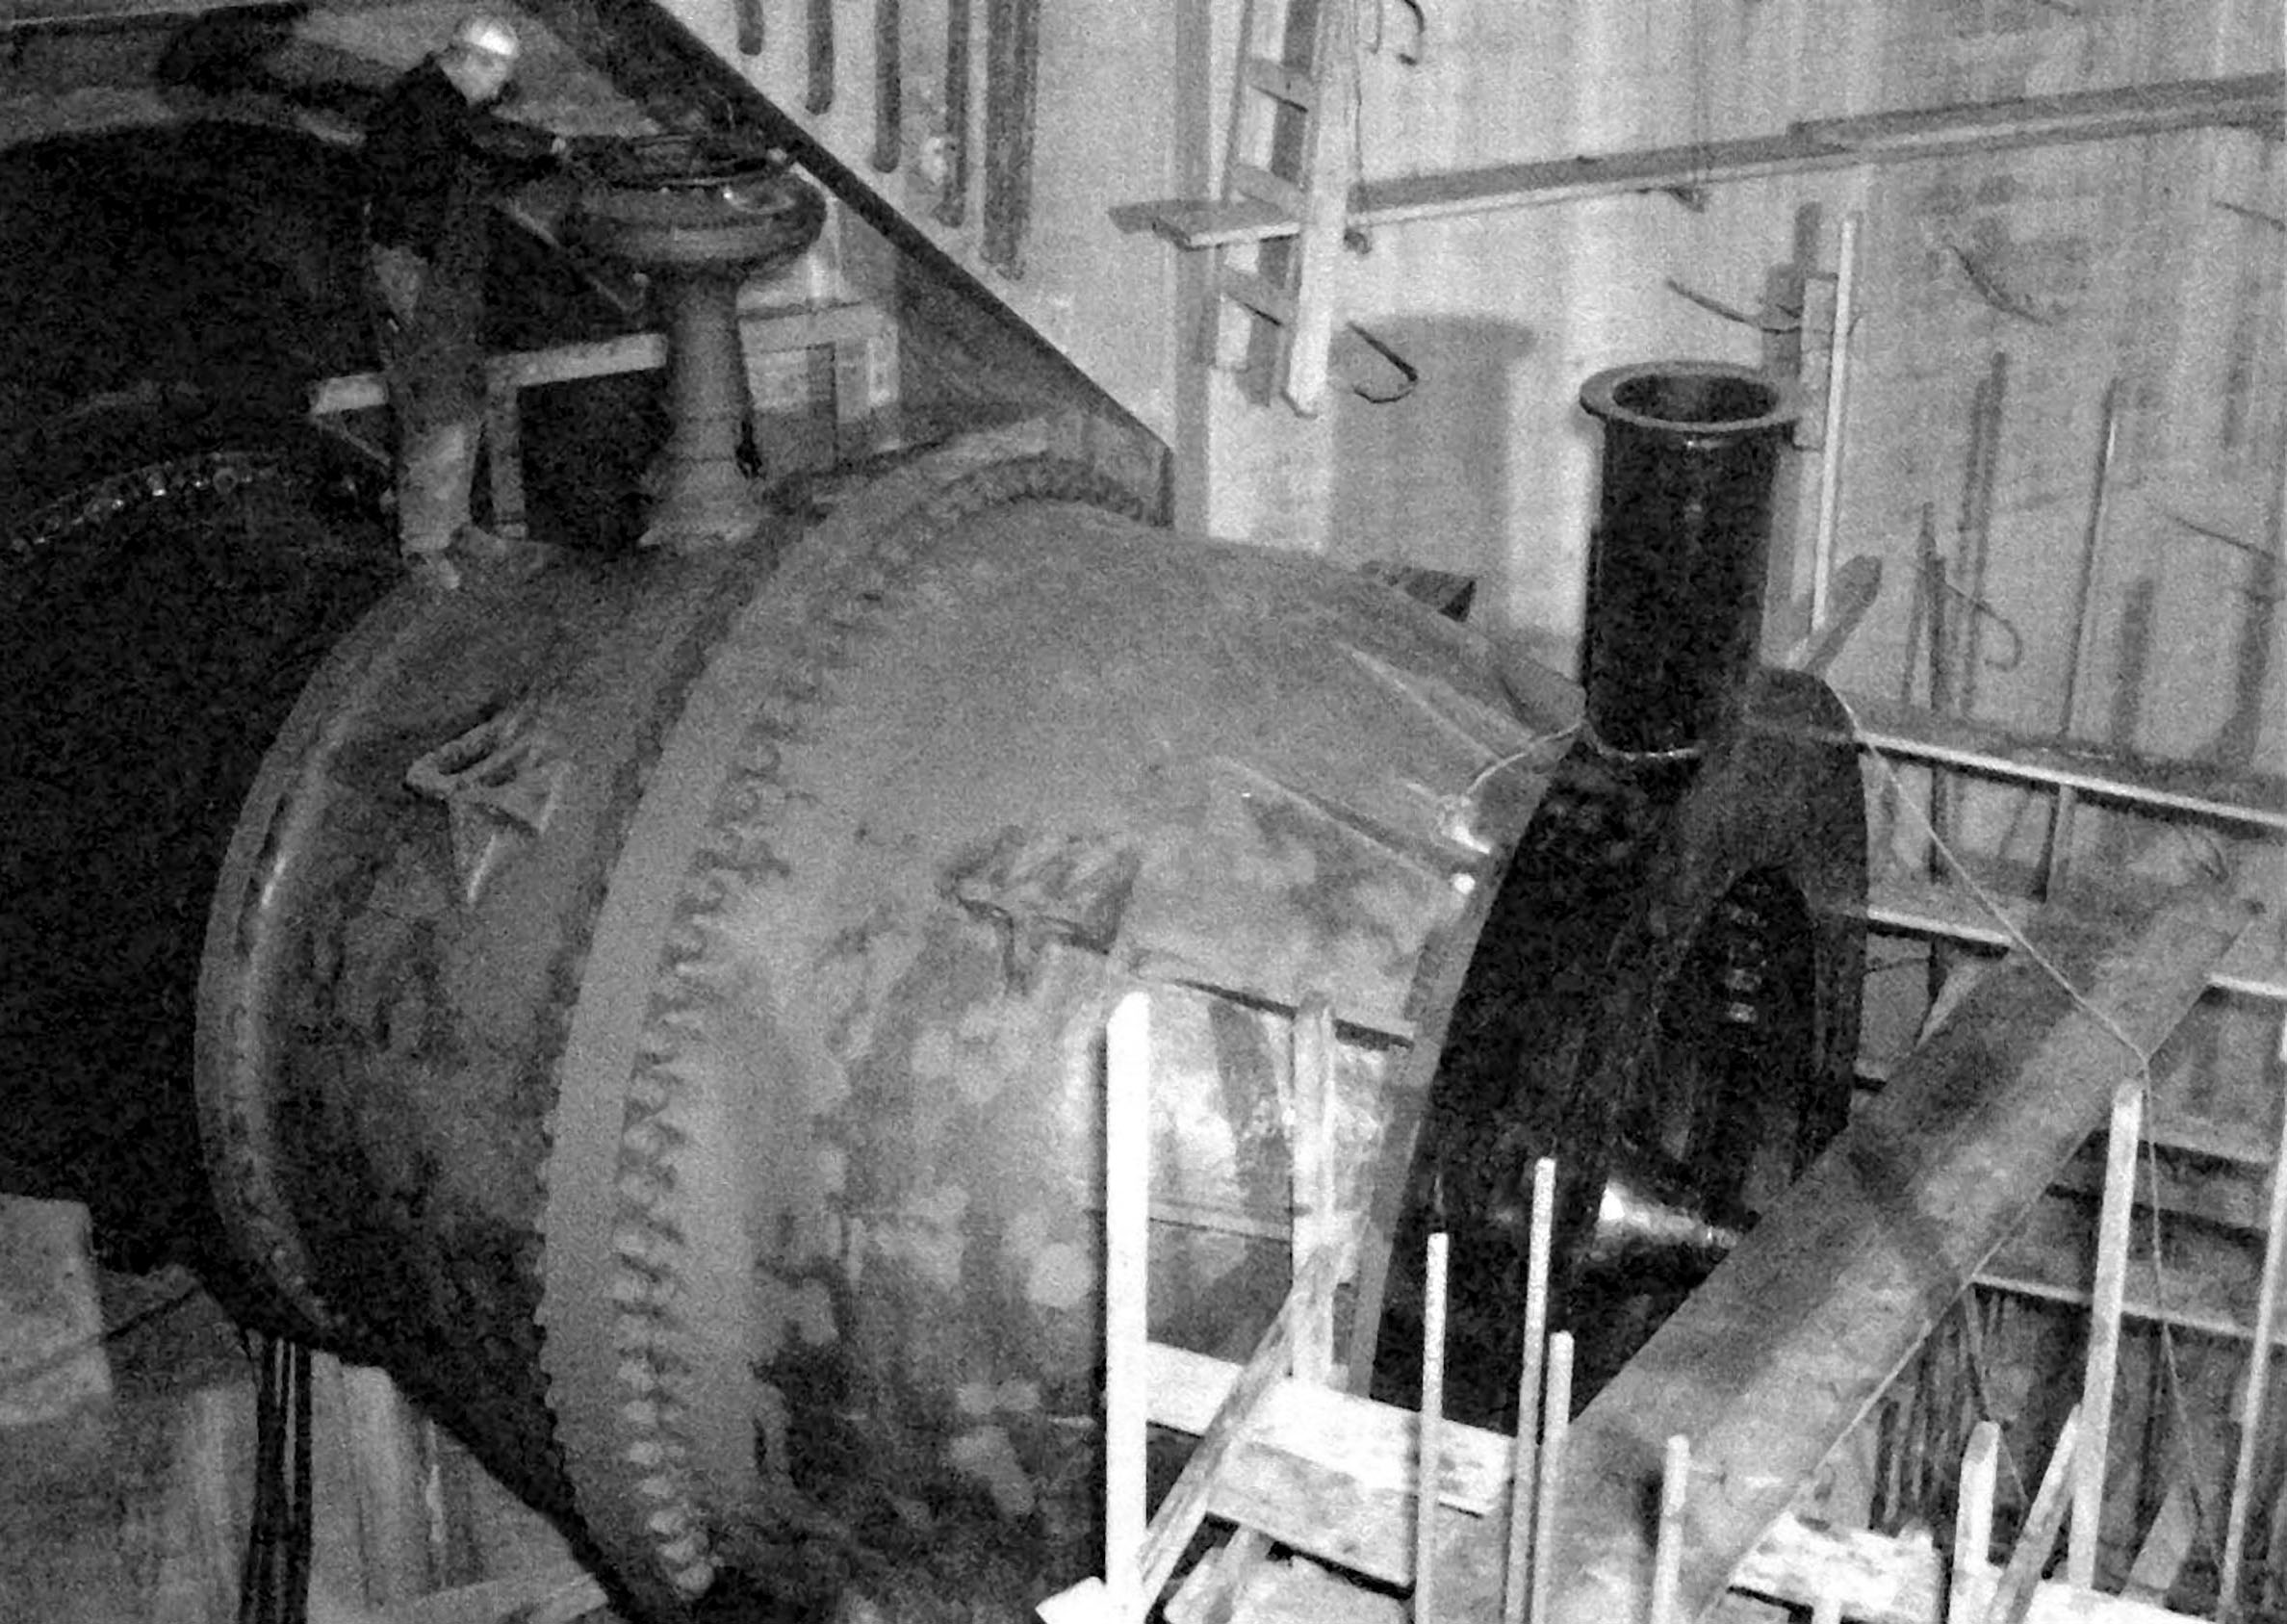 January 2, 1945. 84 inch needle valves are being installed in the east powerhouse at Grand Coulee Dam between the penstocks and draft tubes for water diversion.